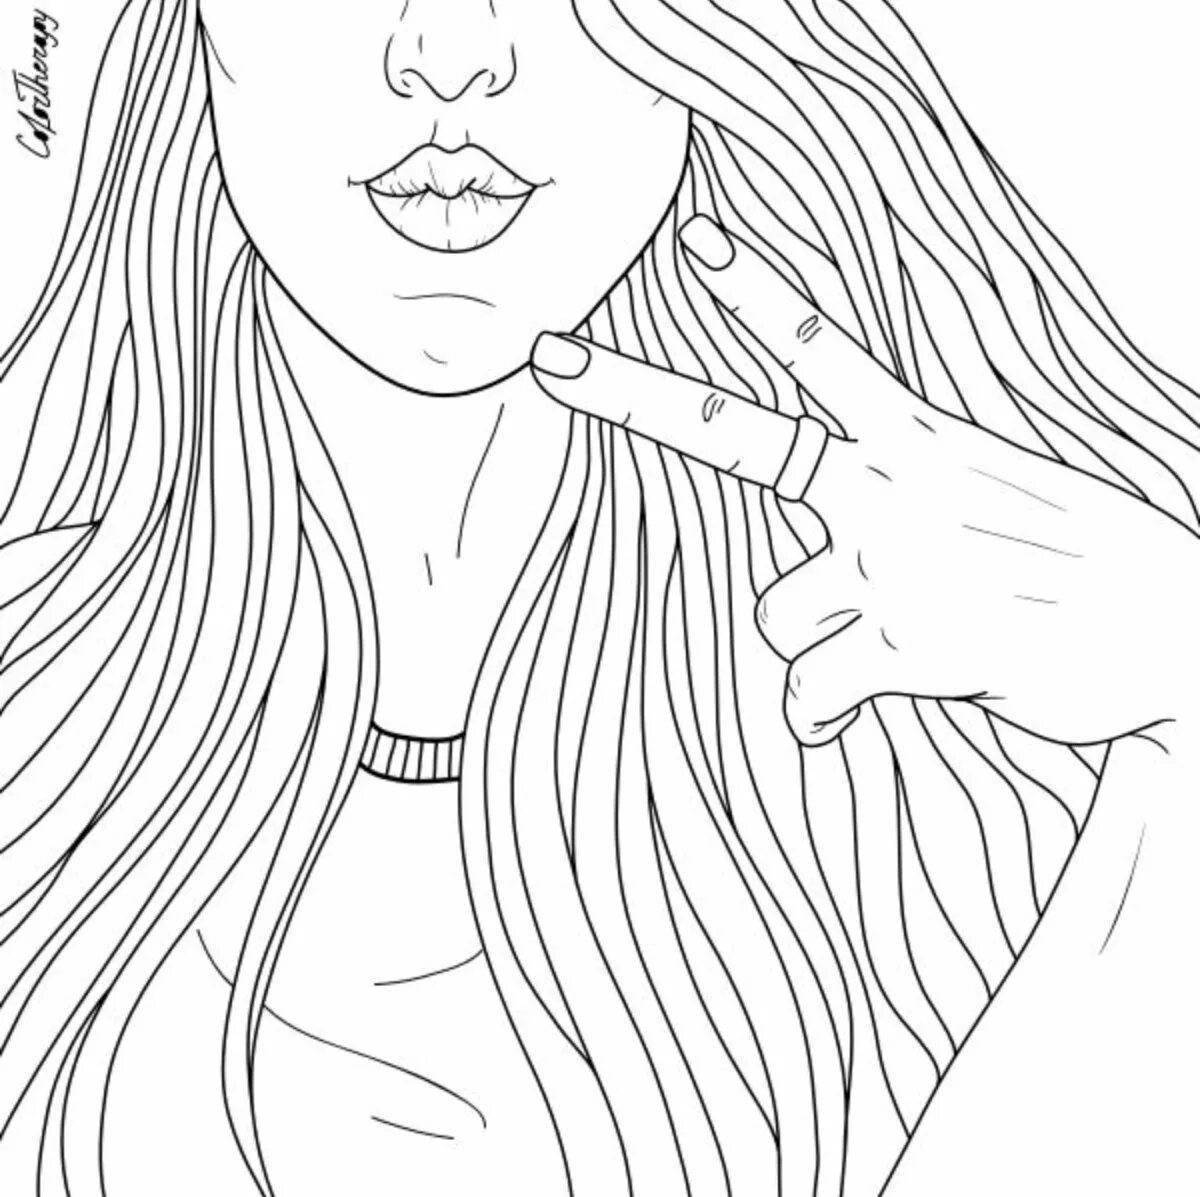 Coloring pages cheeky girls are fun